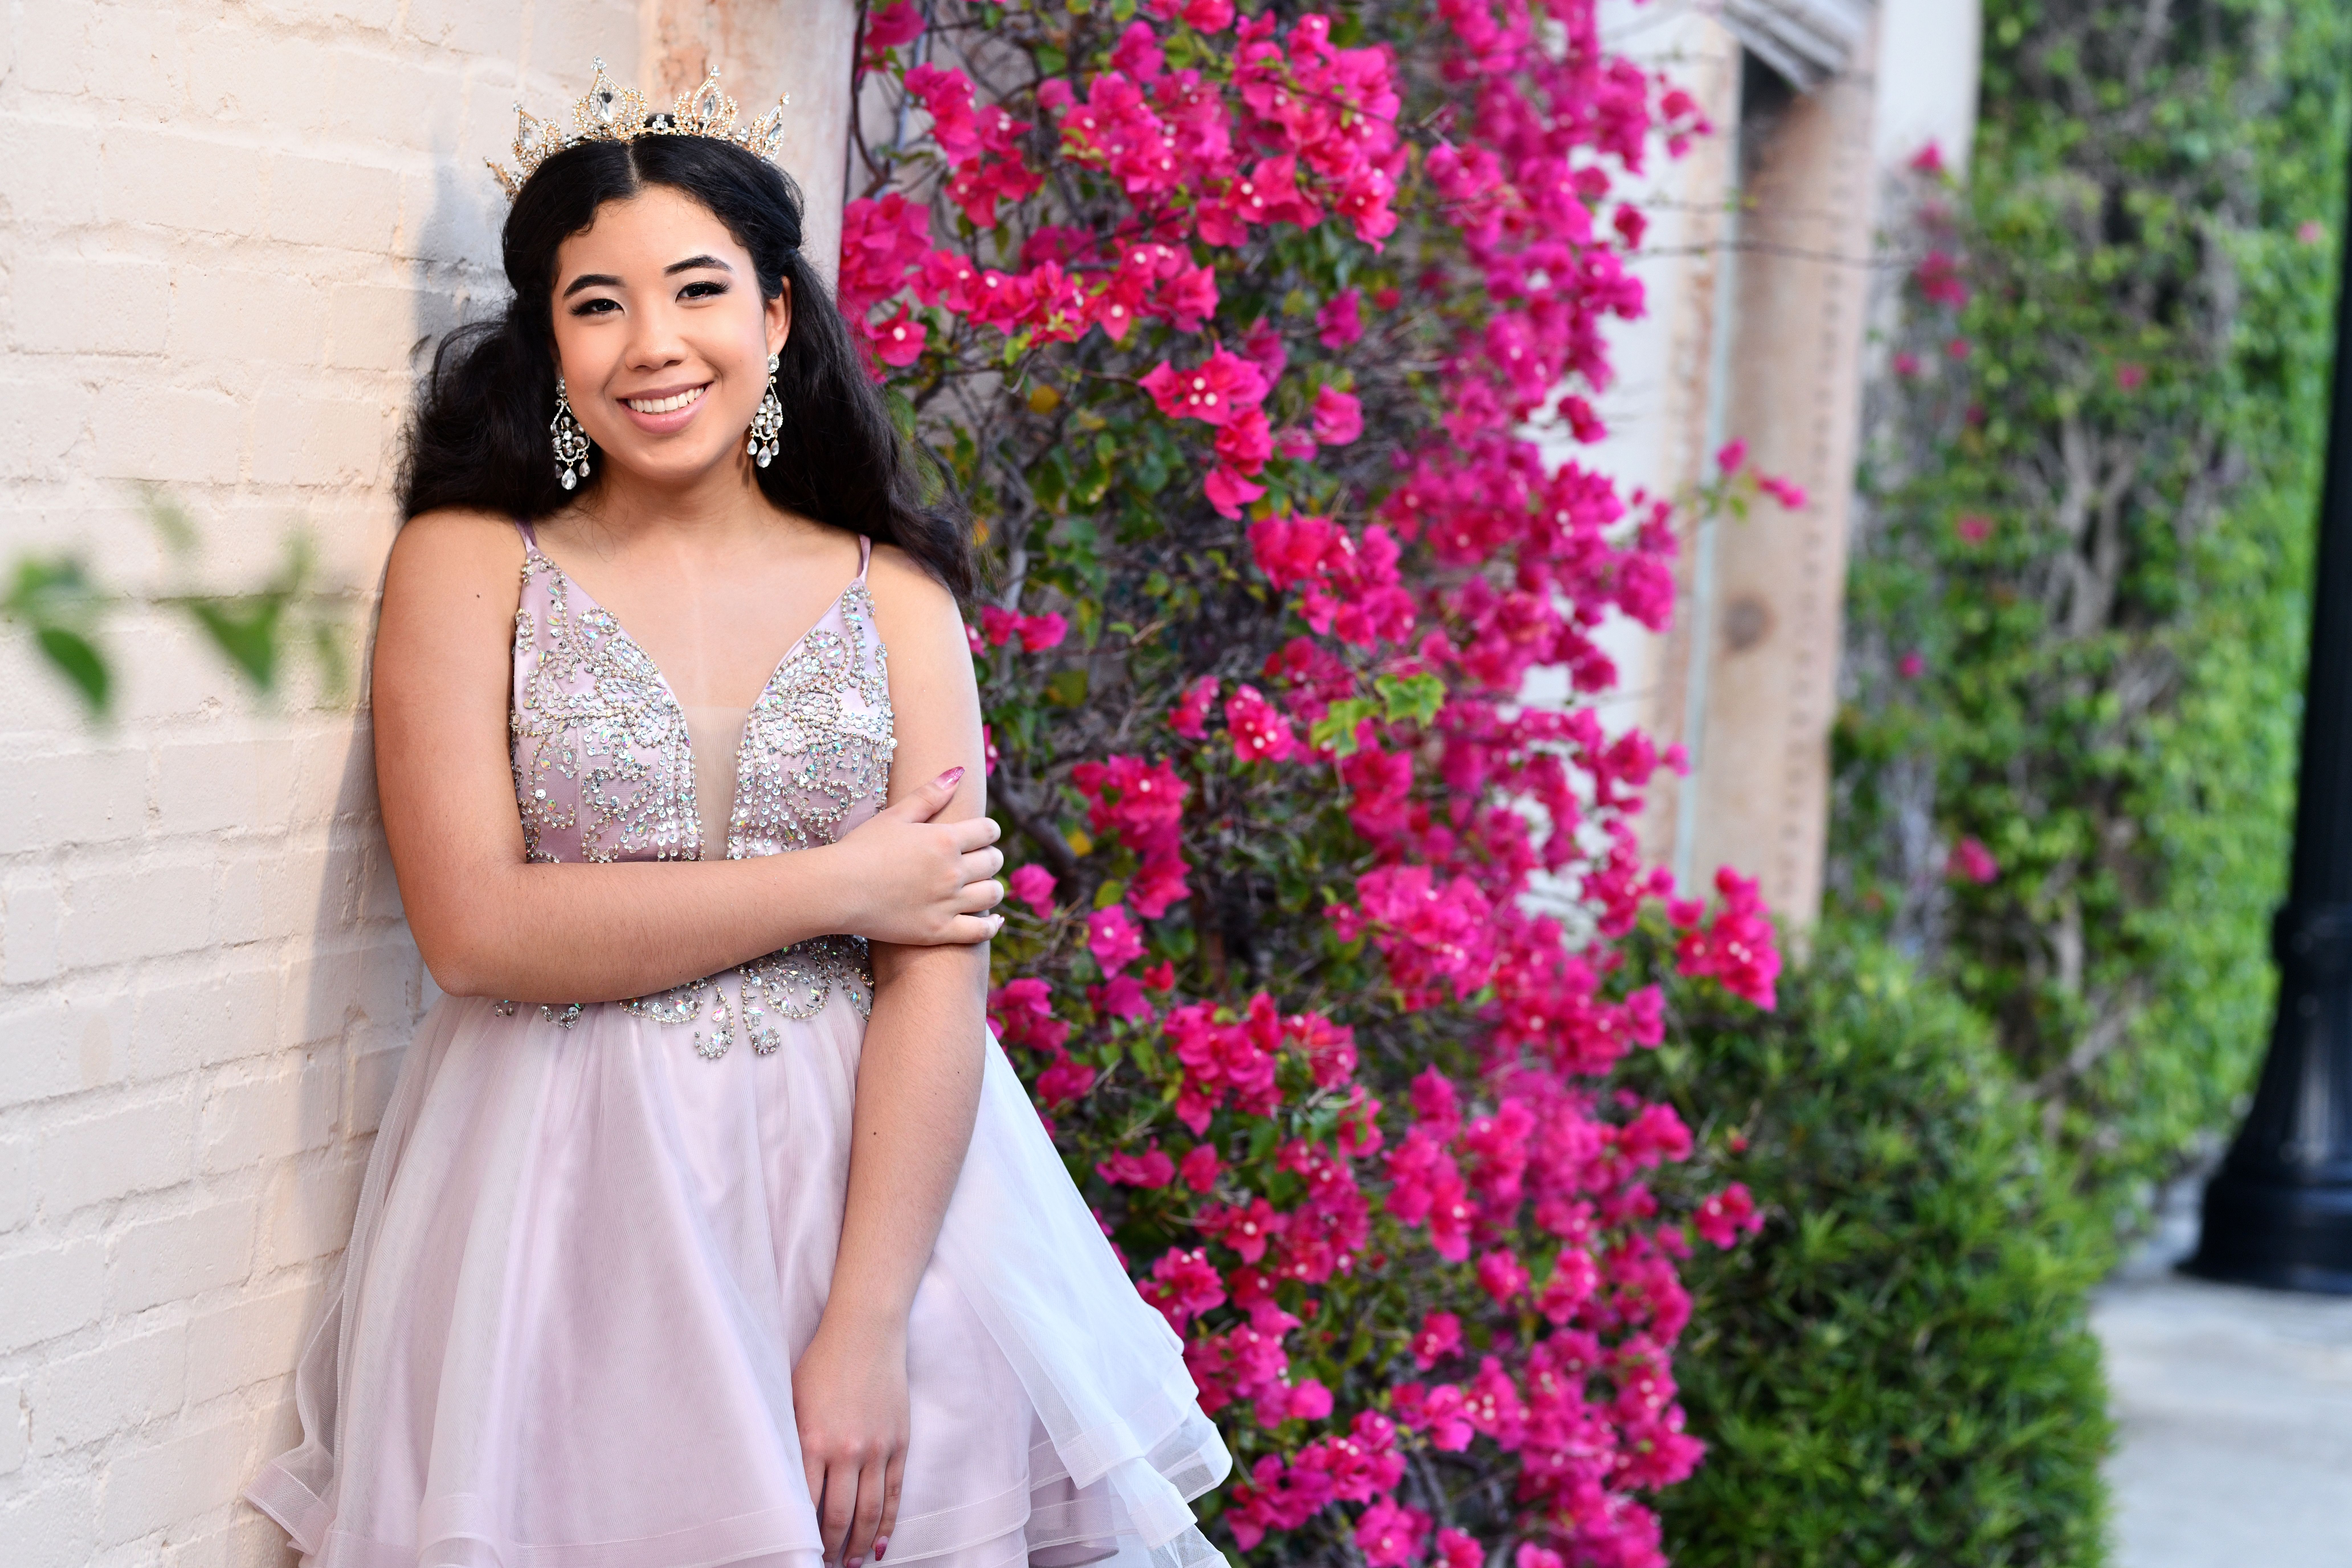 A woman wearing a gown Quinceañera standing in front of a wall with pink flowers.